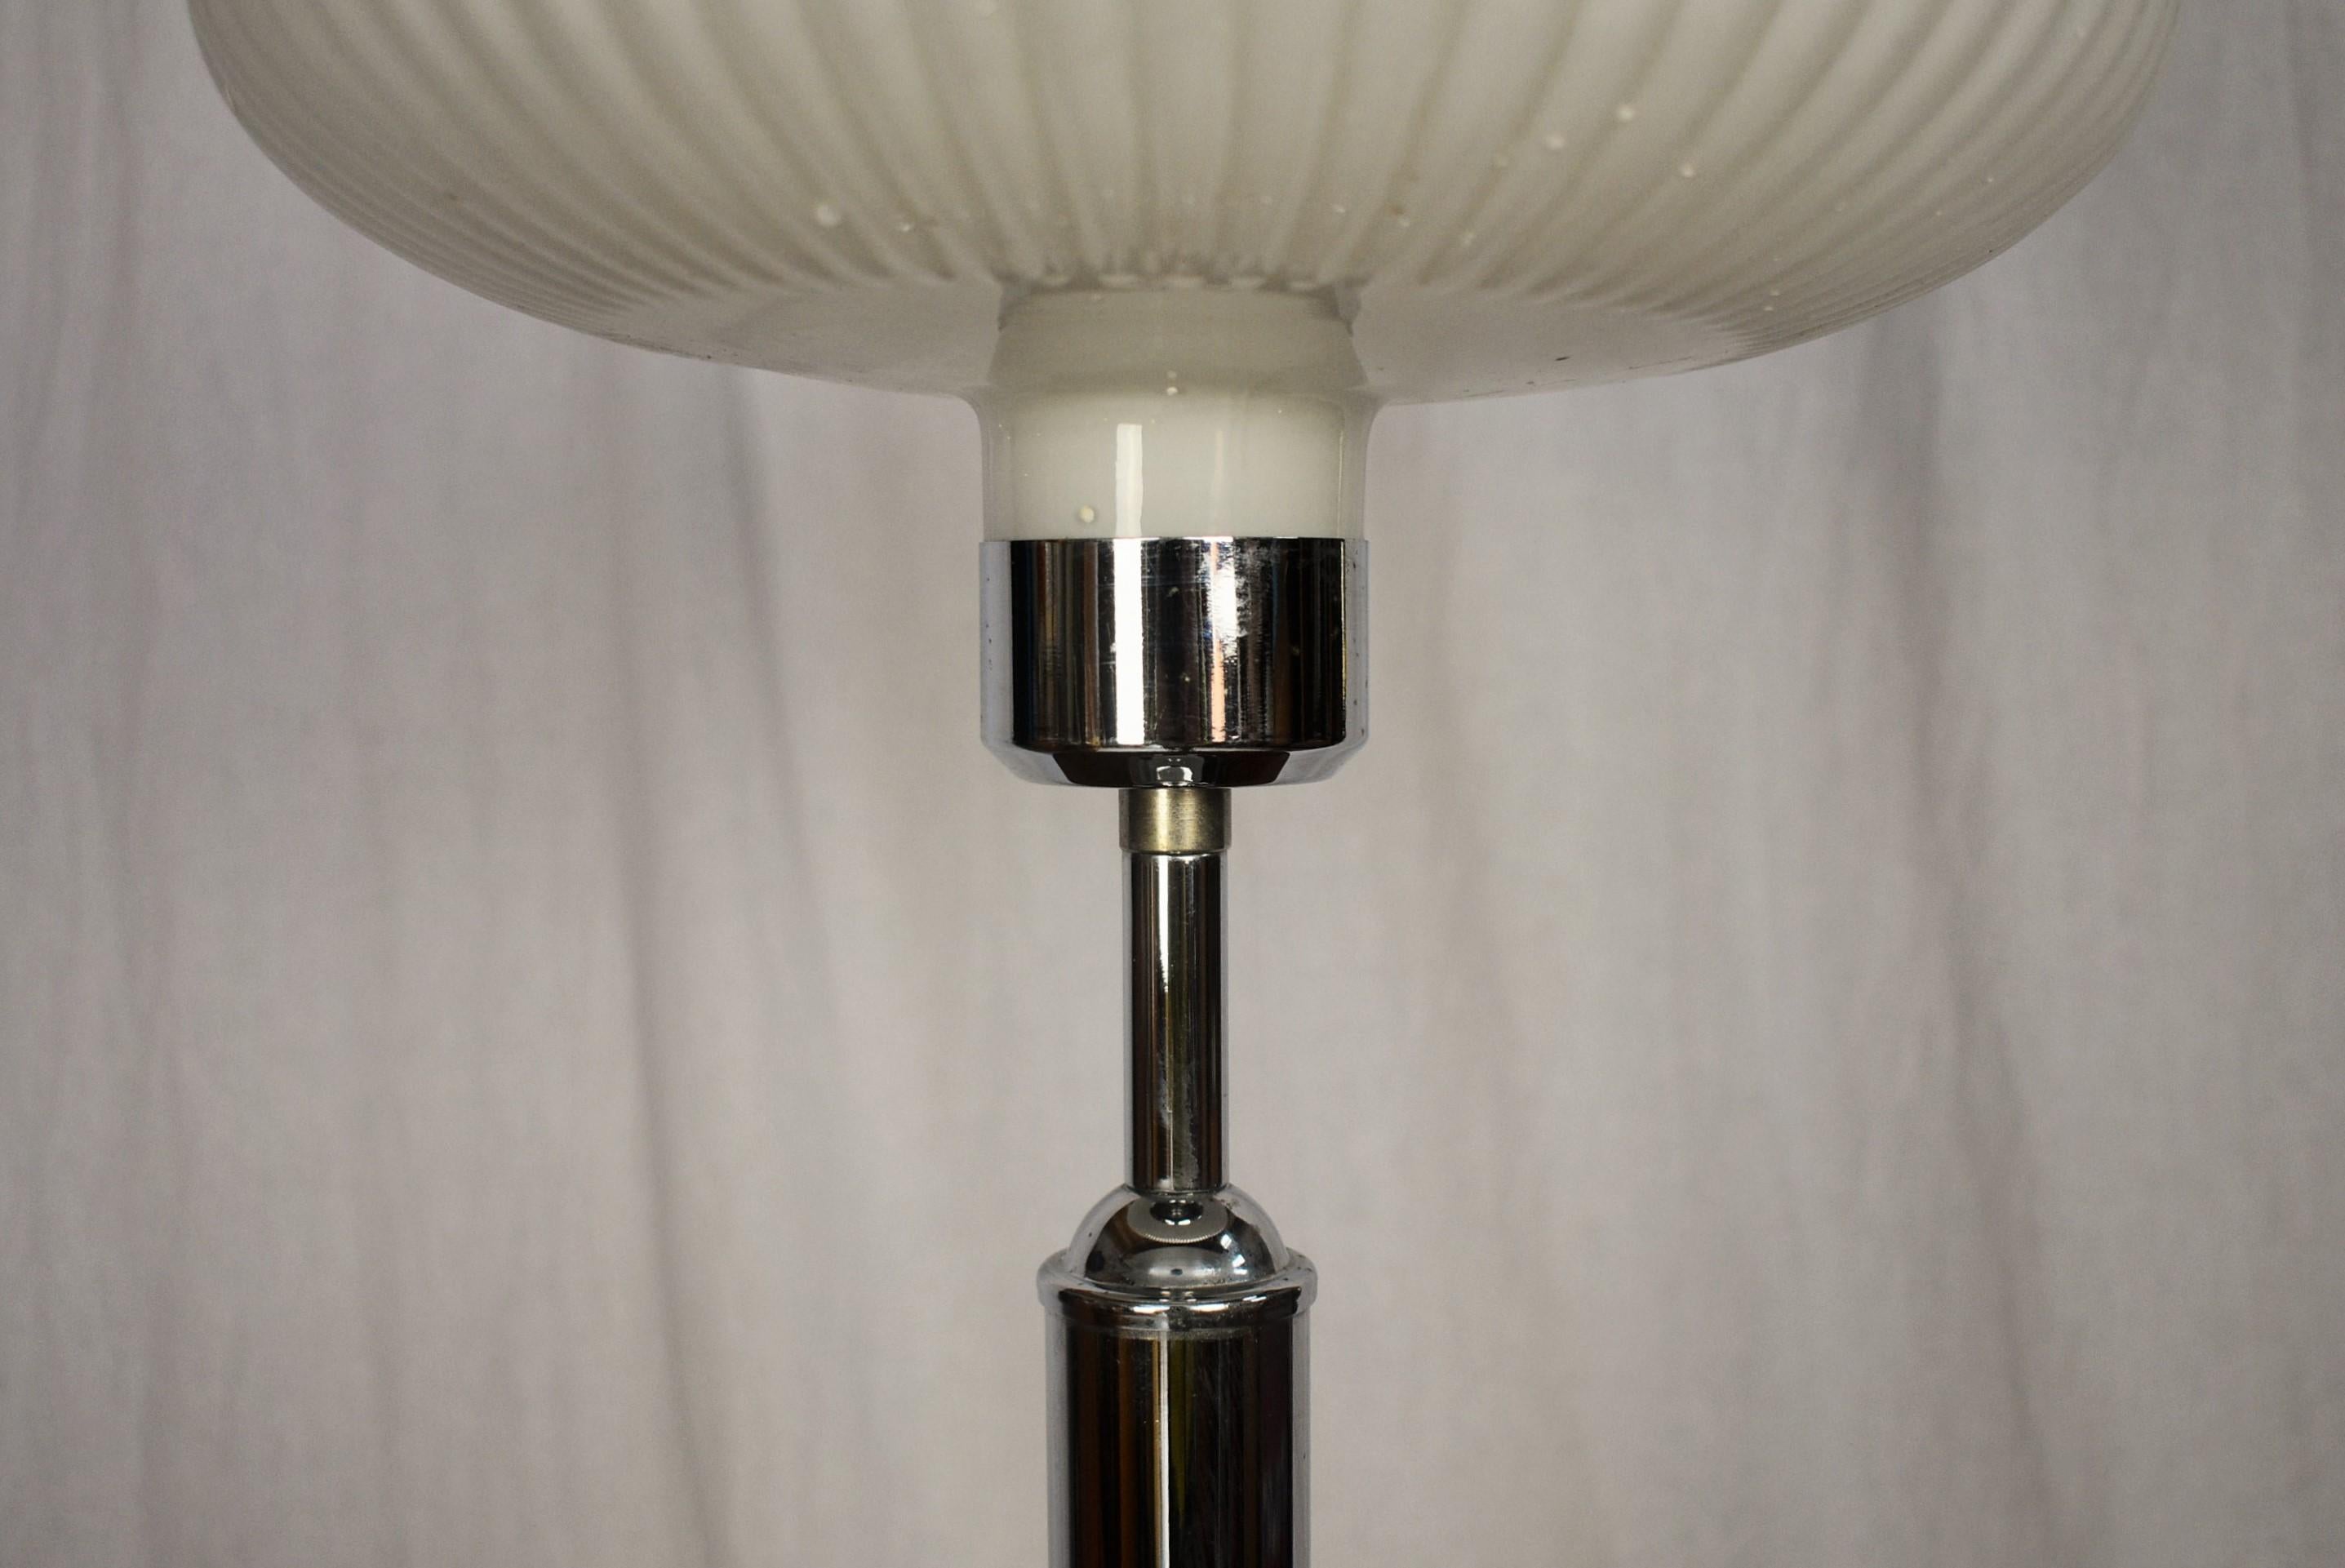 Early 20th Century Art Deco or Functionalist Nickel-Plated Table Lamp, 1920s For Sale